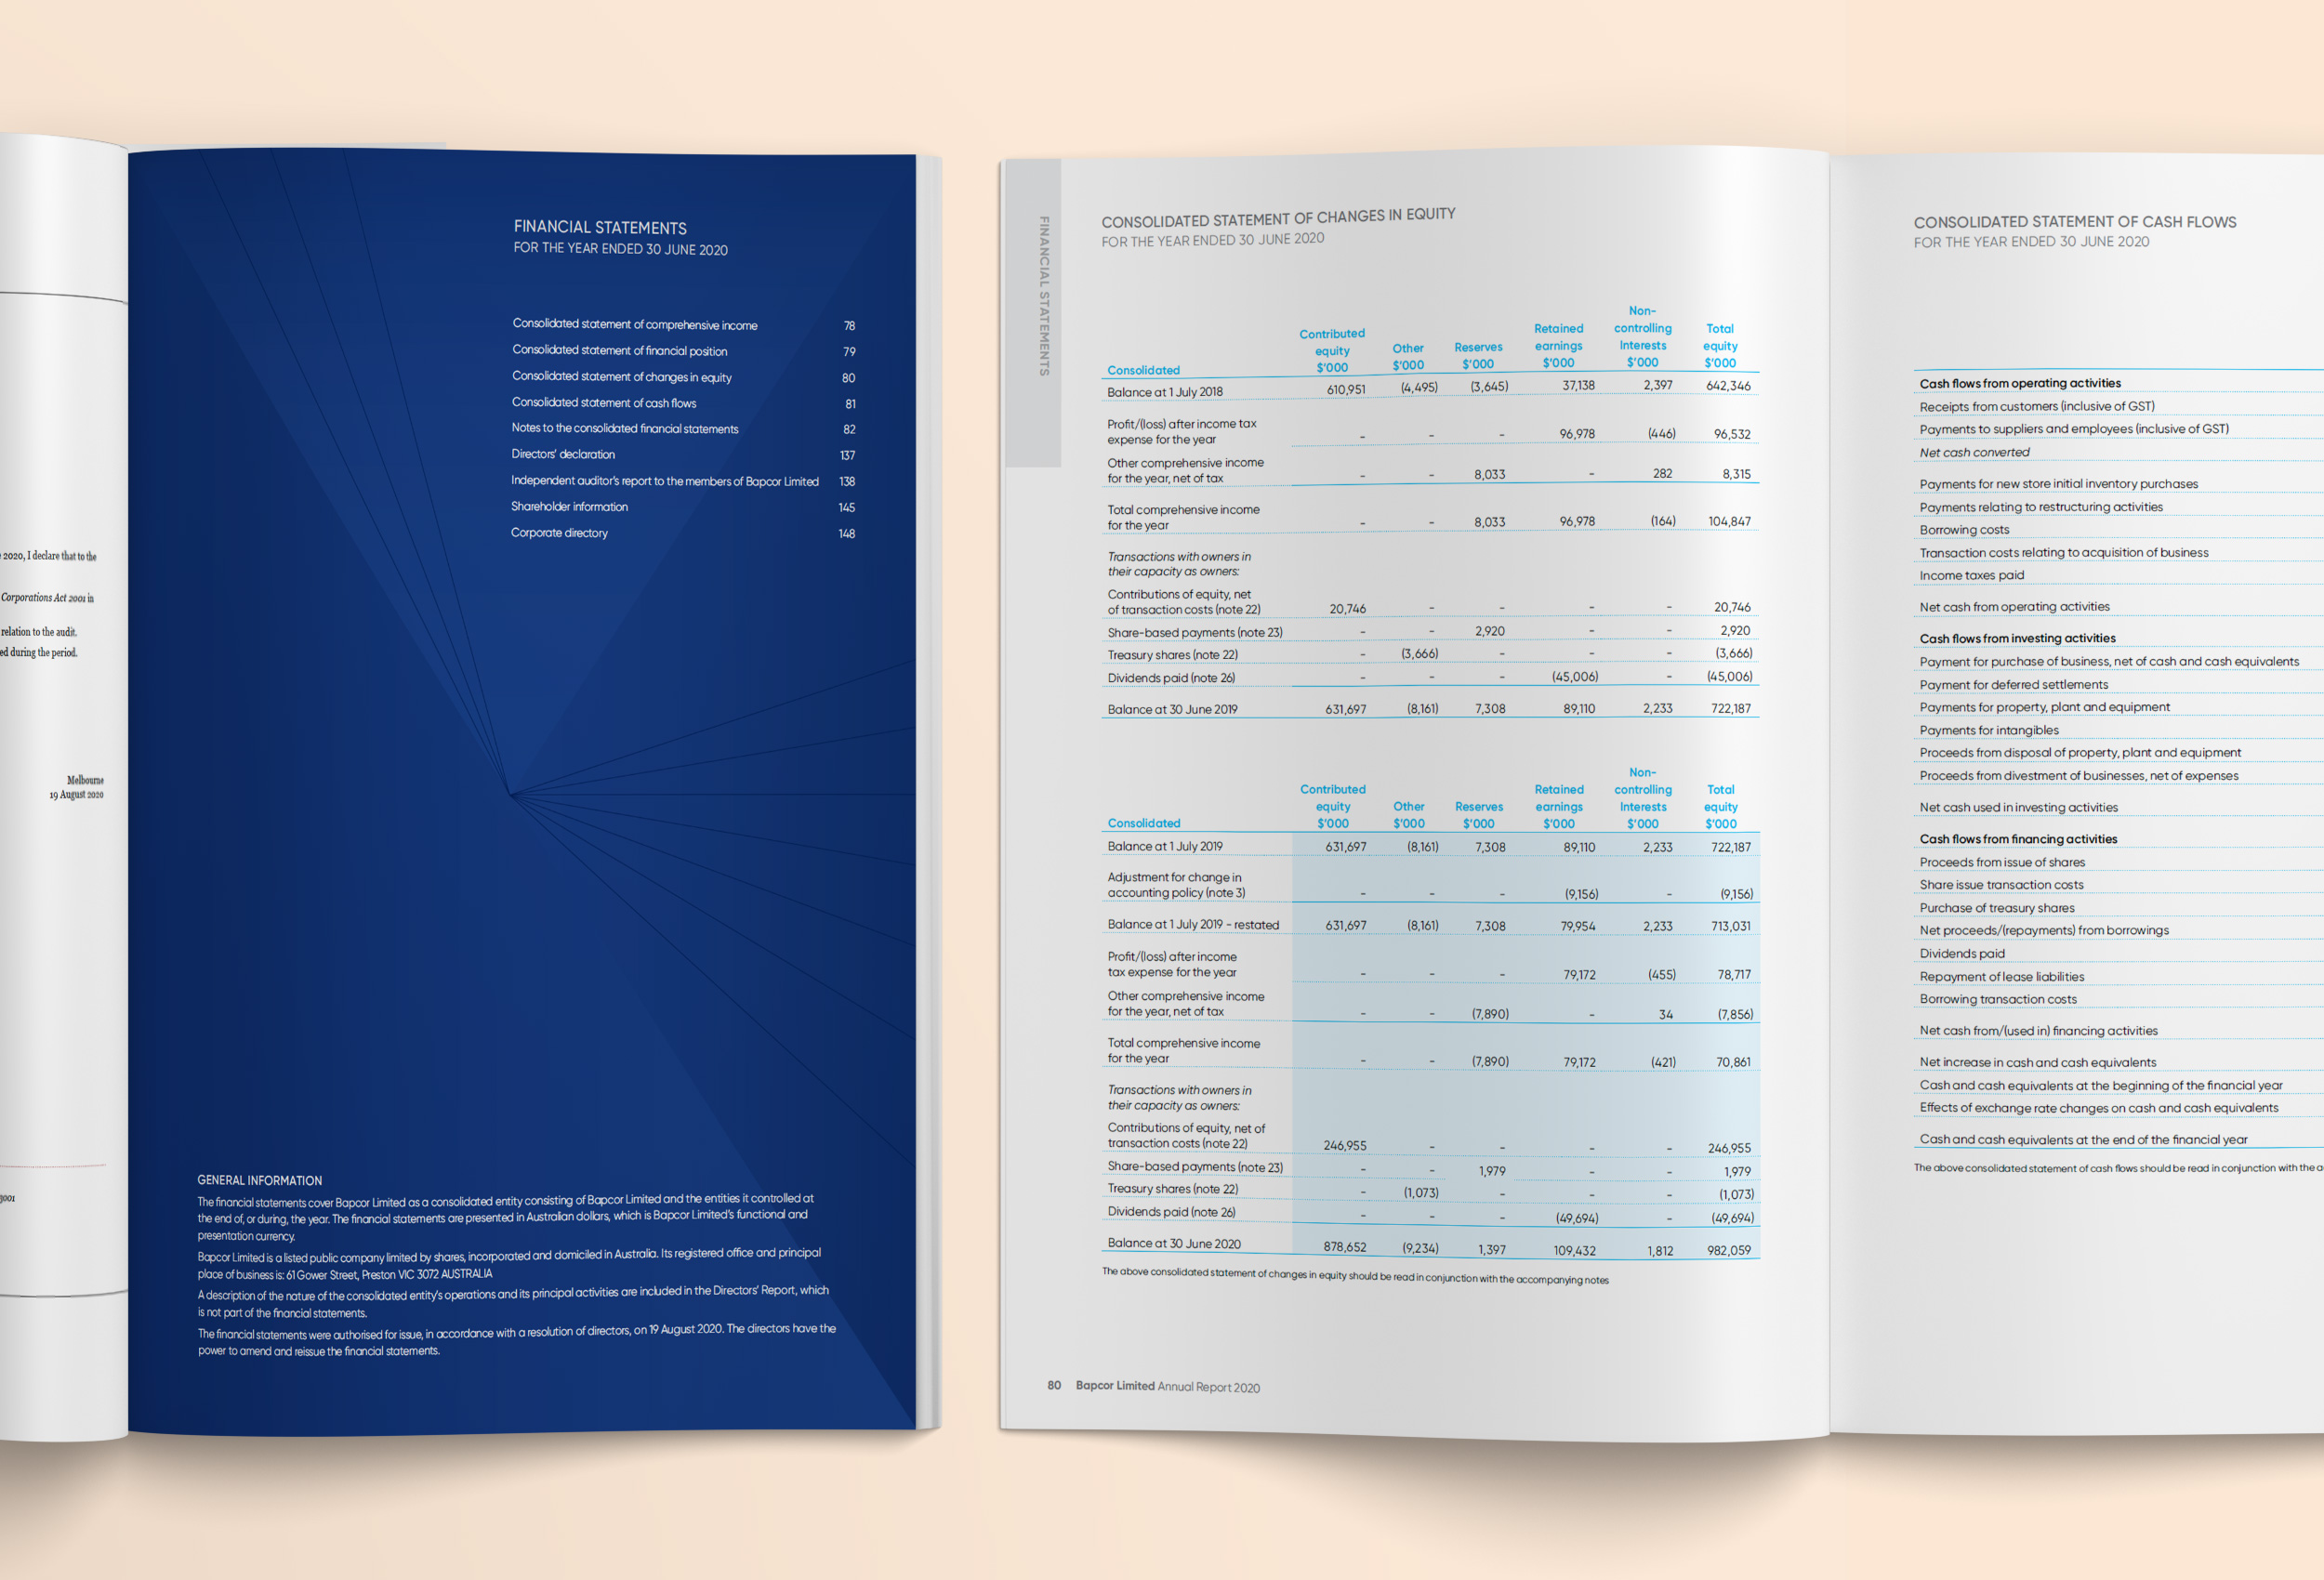 Bapcor Annual Report financials internal page layout